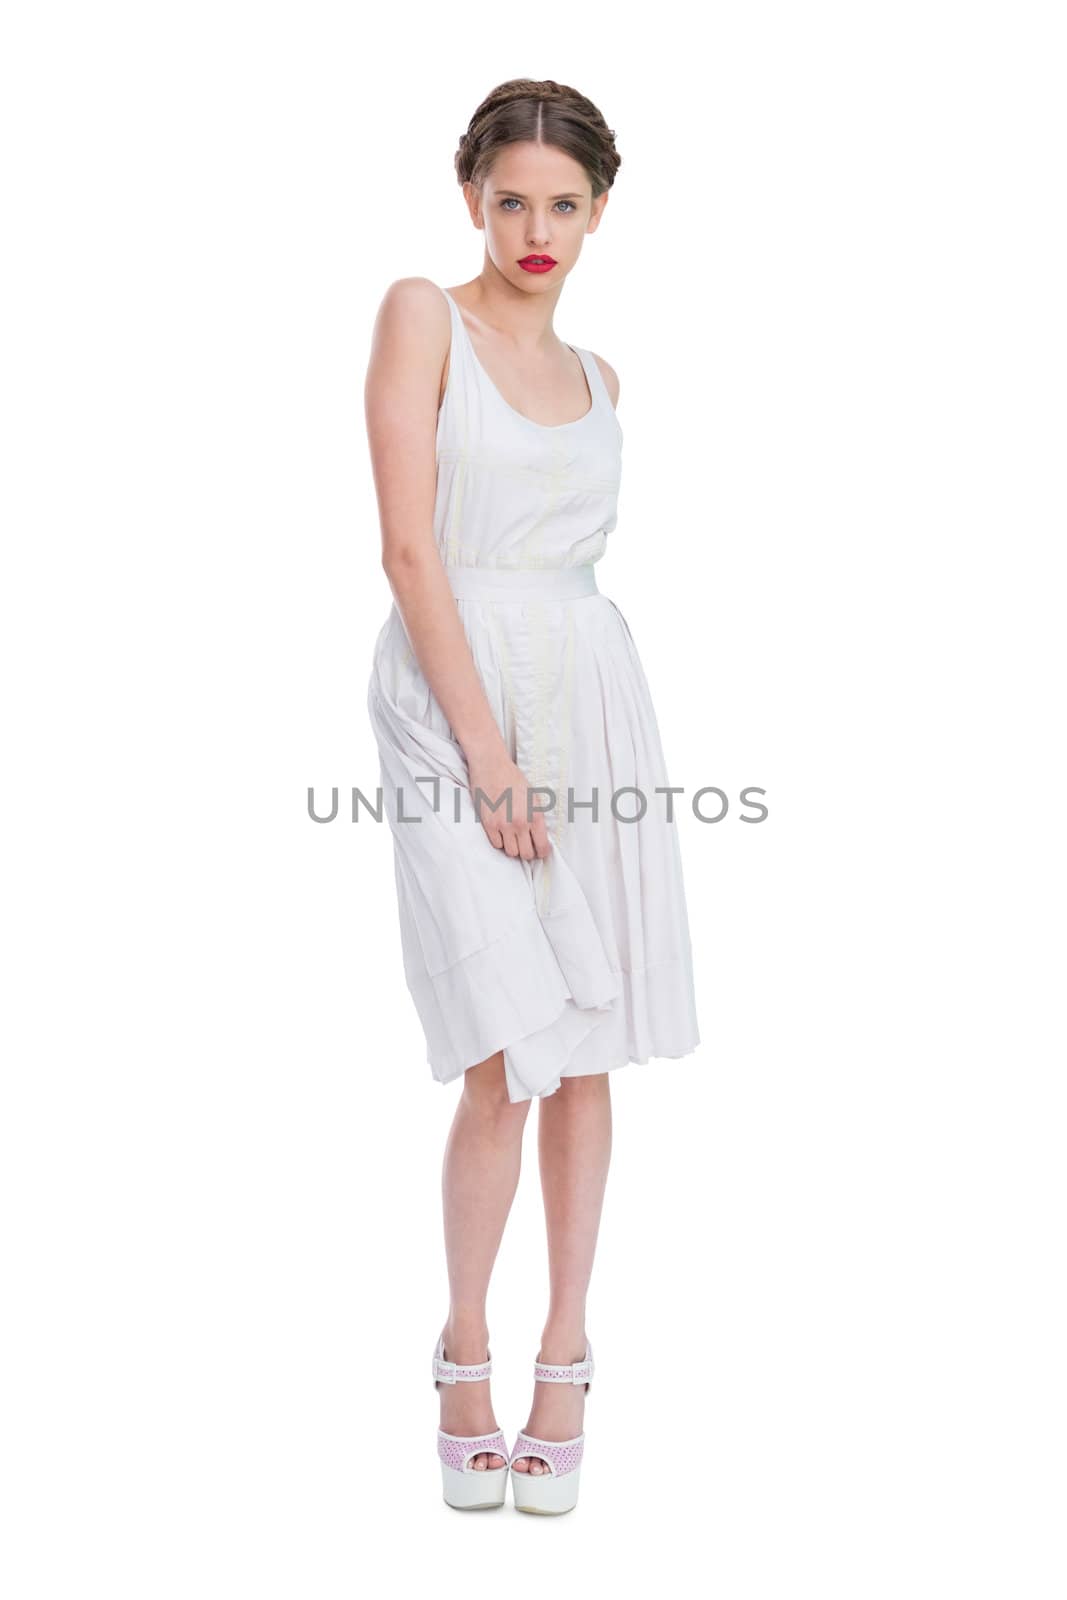 Attractive woman wearing white summer dress standing by Wavebreakmedia